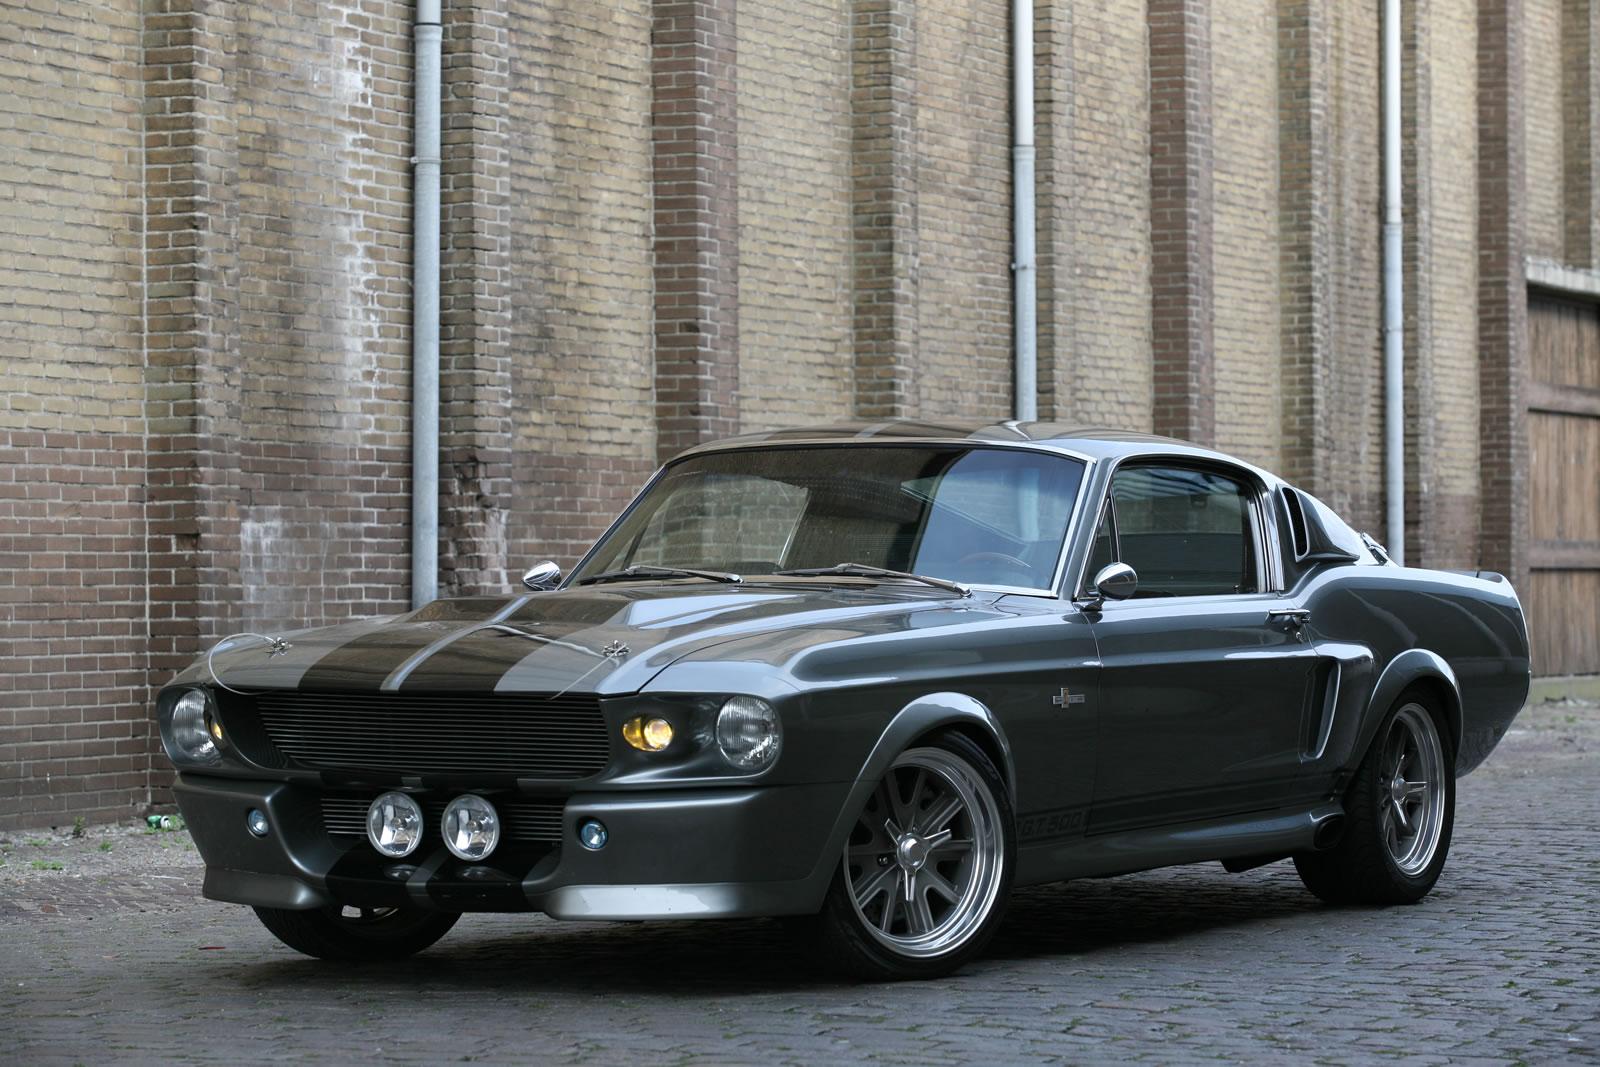 Free Download Mustang Shelby Gt500 Eleanor 1967 Dark Cars Wallpapers 1600x1067 For Your Desktop Mobile Tablet Explore 47 67 Shelby Gt500 Wallpaper Eleanor Wallpaper 1967 Mustang Wallpaper Gt500 Eleanor Wallpapers Hd